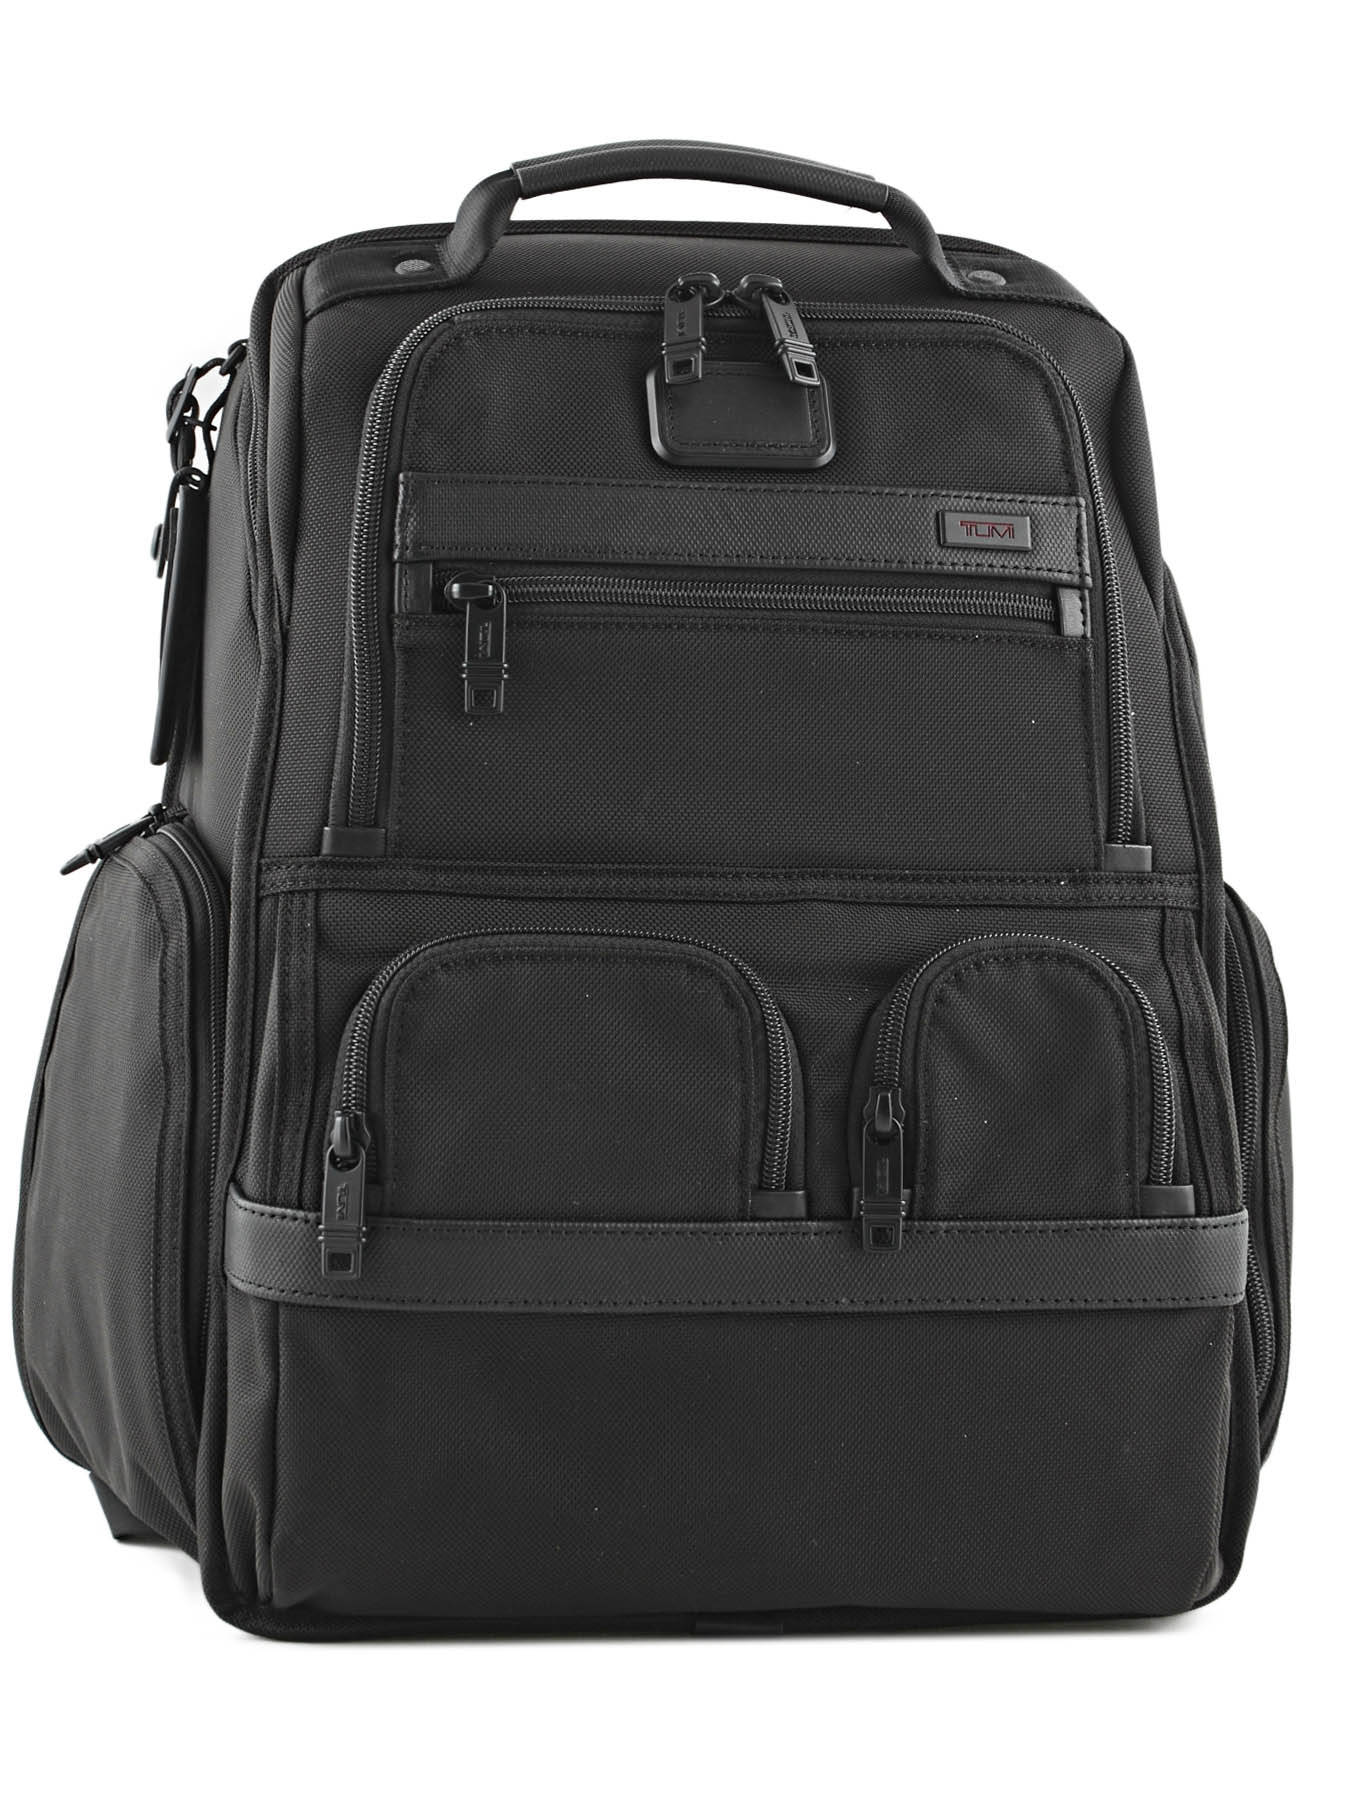 Tumi Small Laptop Backpack | IUCN Water